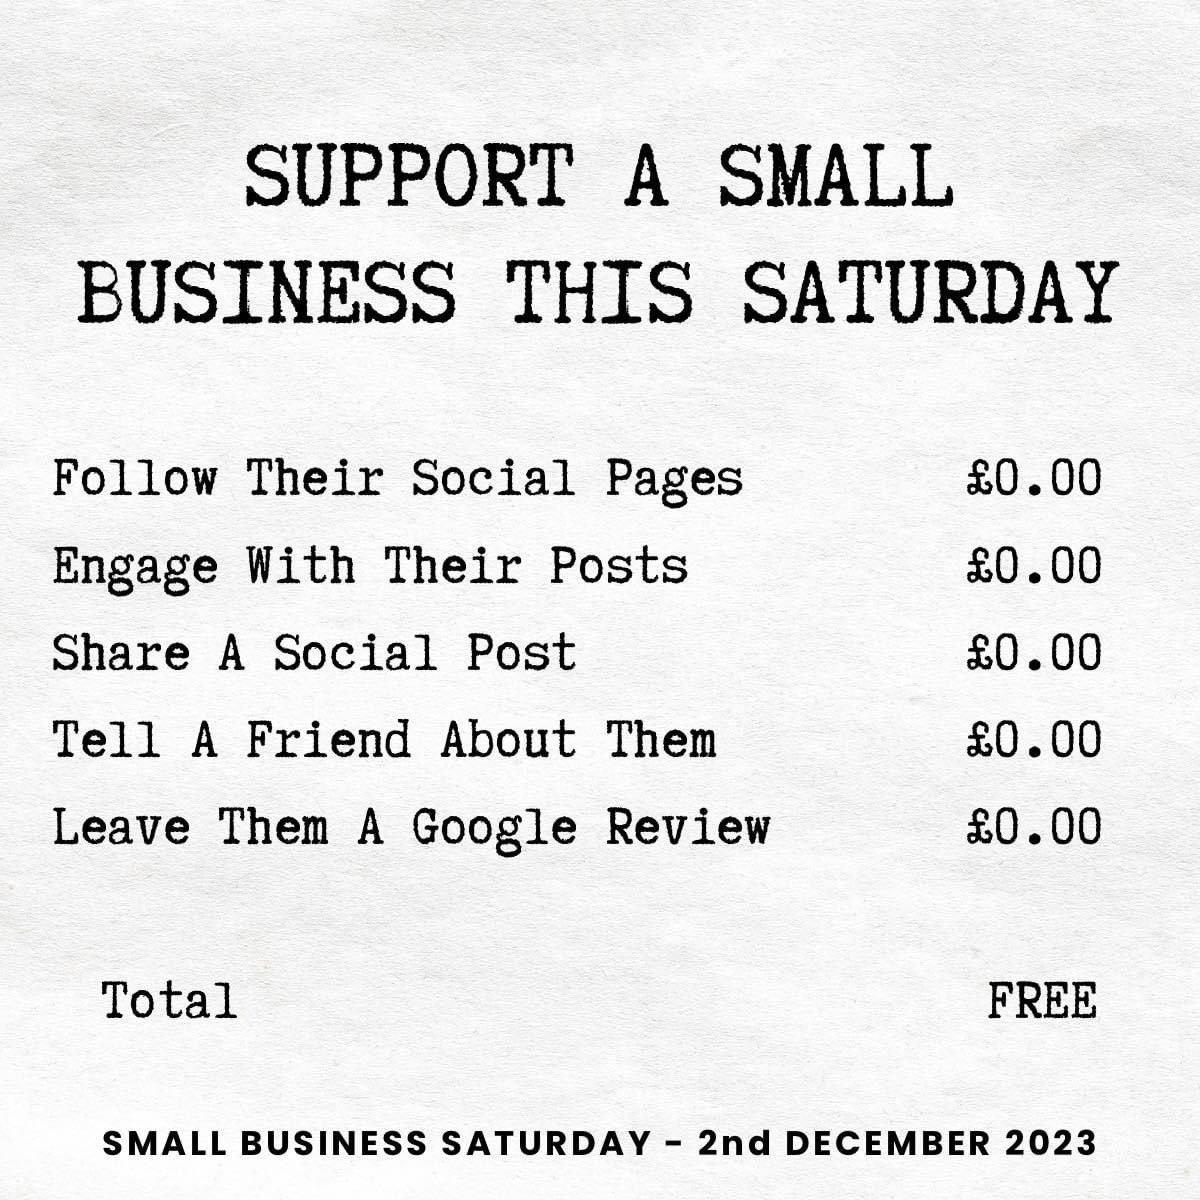 For all my #smallbusiness pals - today and for life #supportsmallbuylocal #smallbusinesssaturday #smallbiz100 💙🩵💙